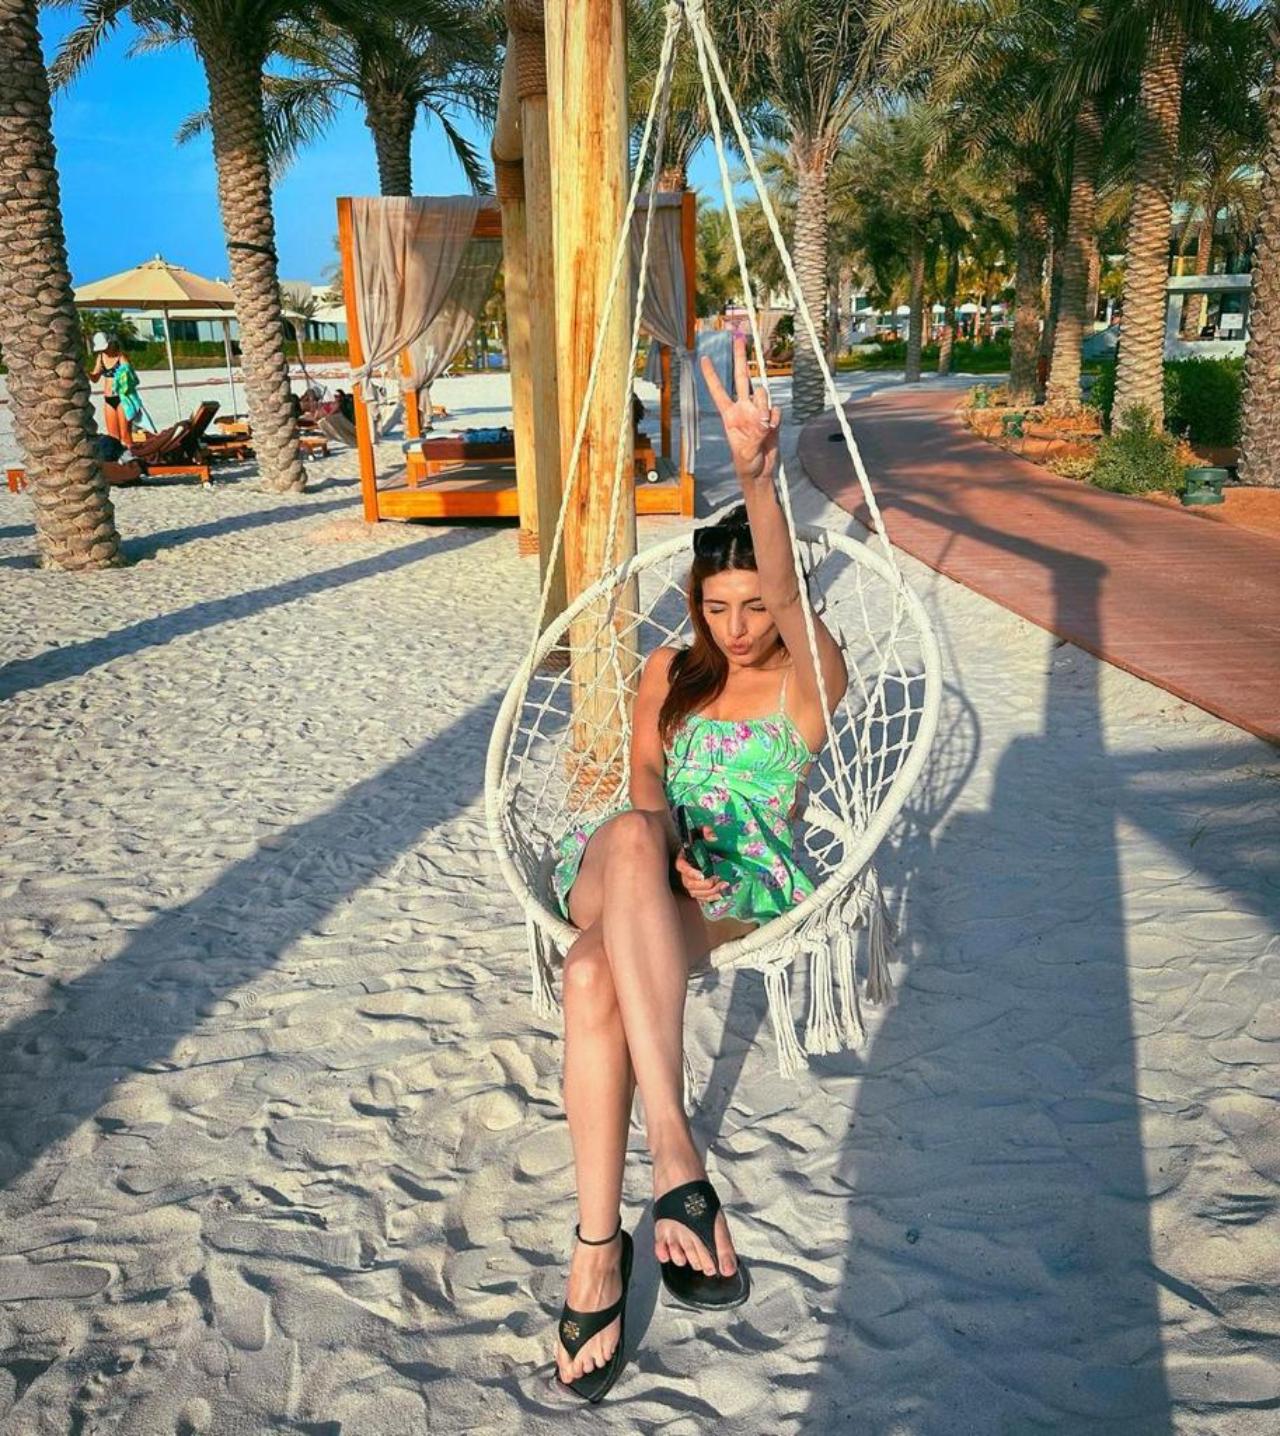 Prakriti Kakkar looks absolutely stunning in her green summer dress as she relaxes on a hammock chair on the beach. The vibrant green colour of the dress adds a pop of energy and liveliness to the scene, making it clear that Prakriti is here to have a good time and enjoy the carefree summer days.
 